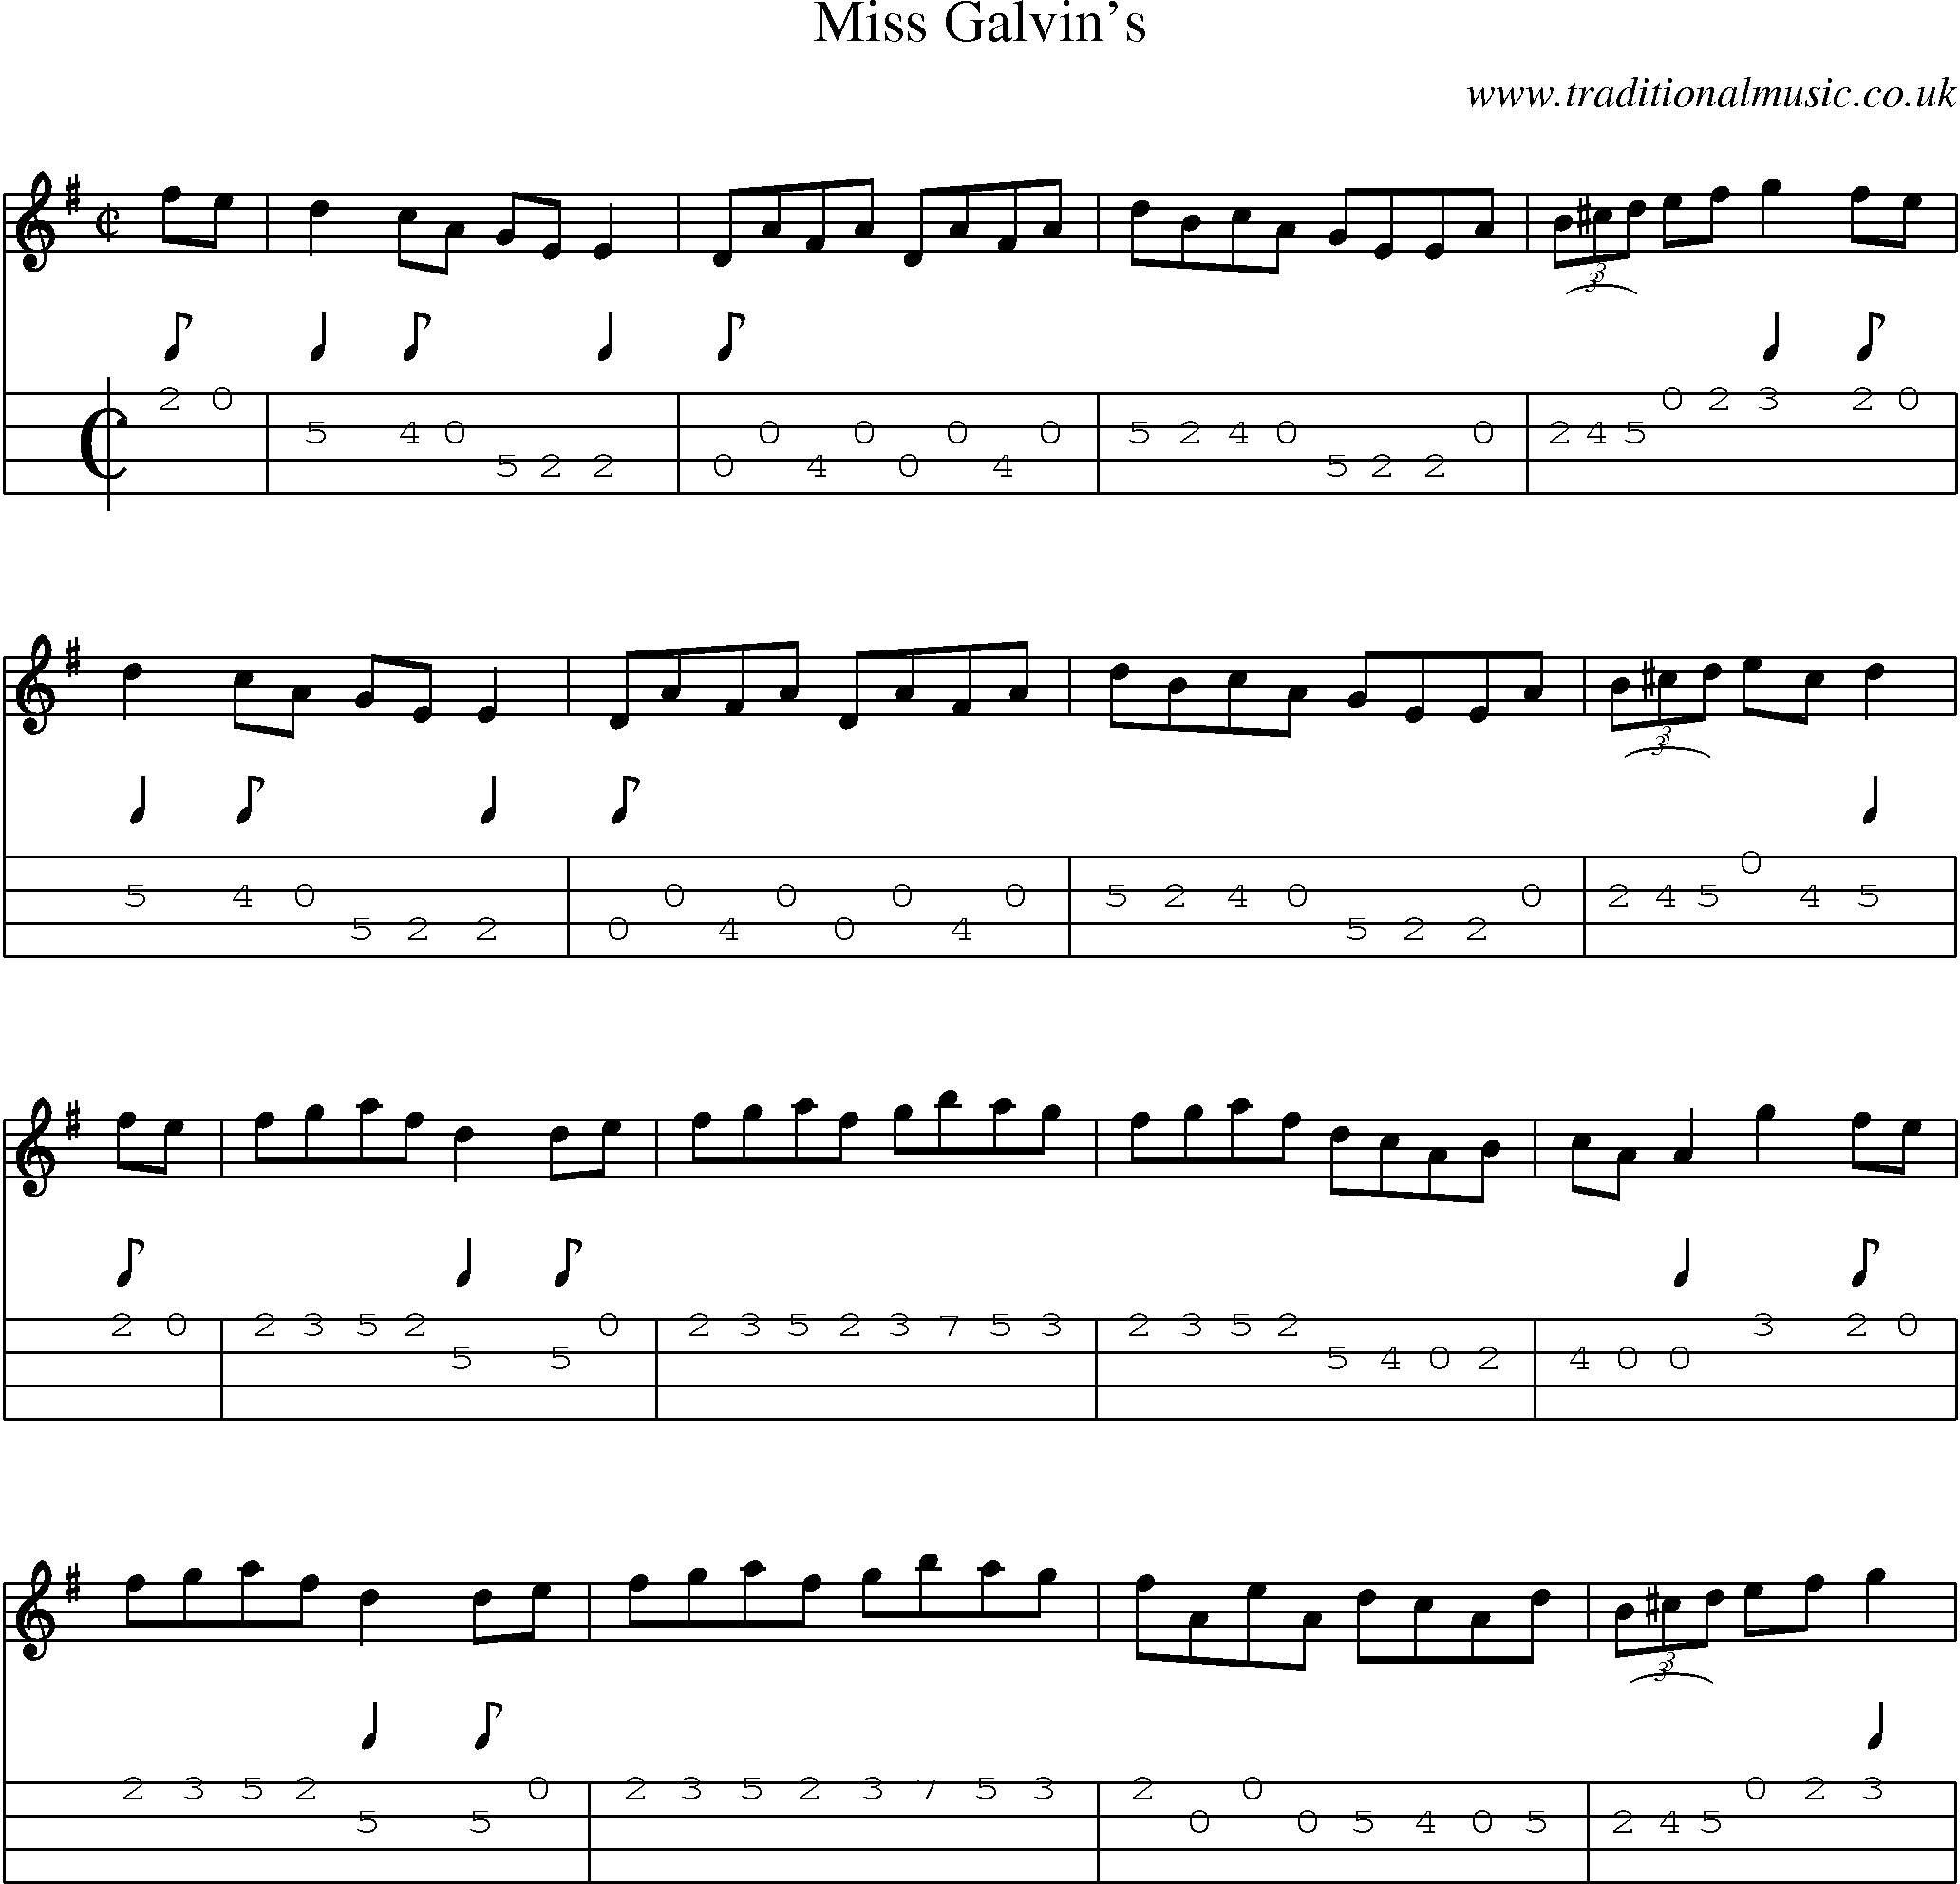 Music Score and Mandolin Tabs for Miss Galvins